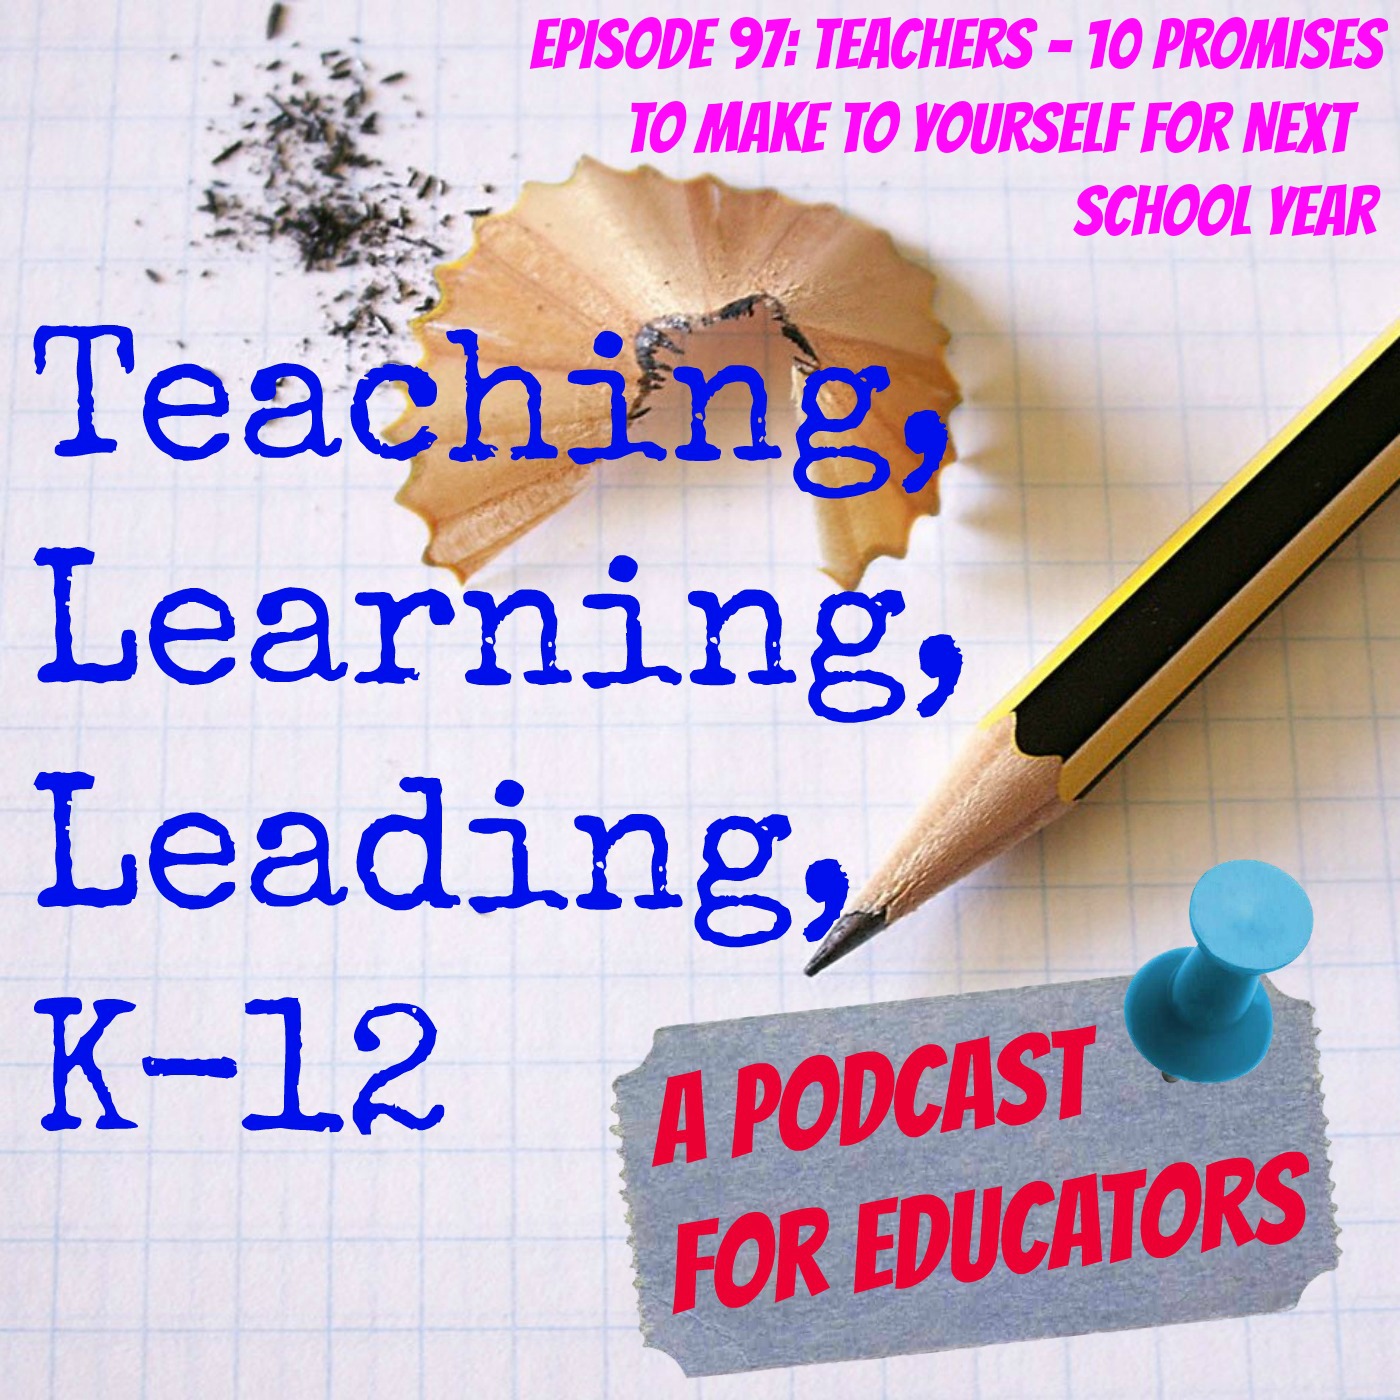 Episode 97: Teachers - 10 Promises to Make Yourself for Next School Year